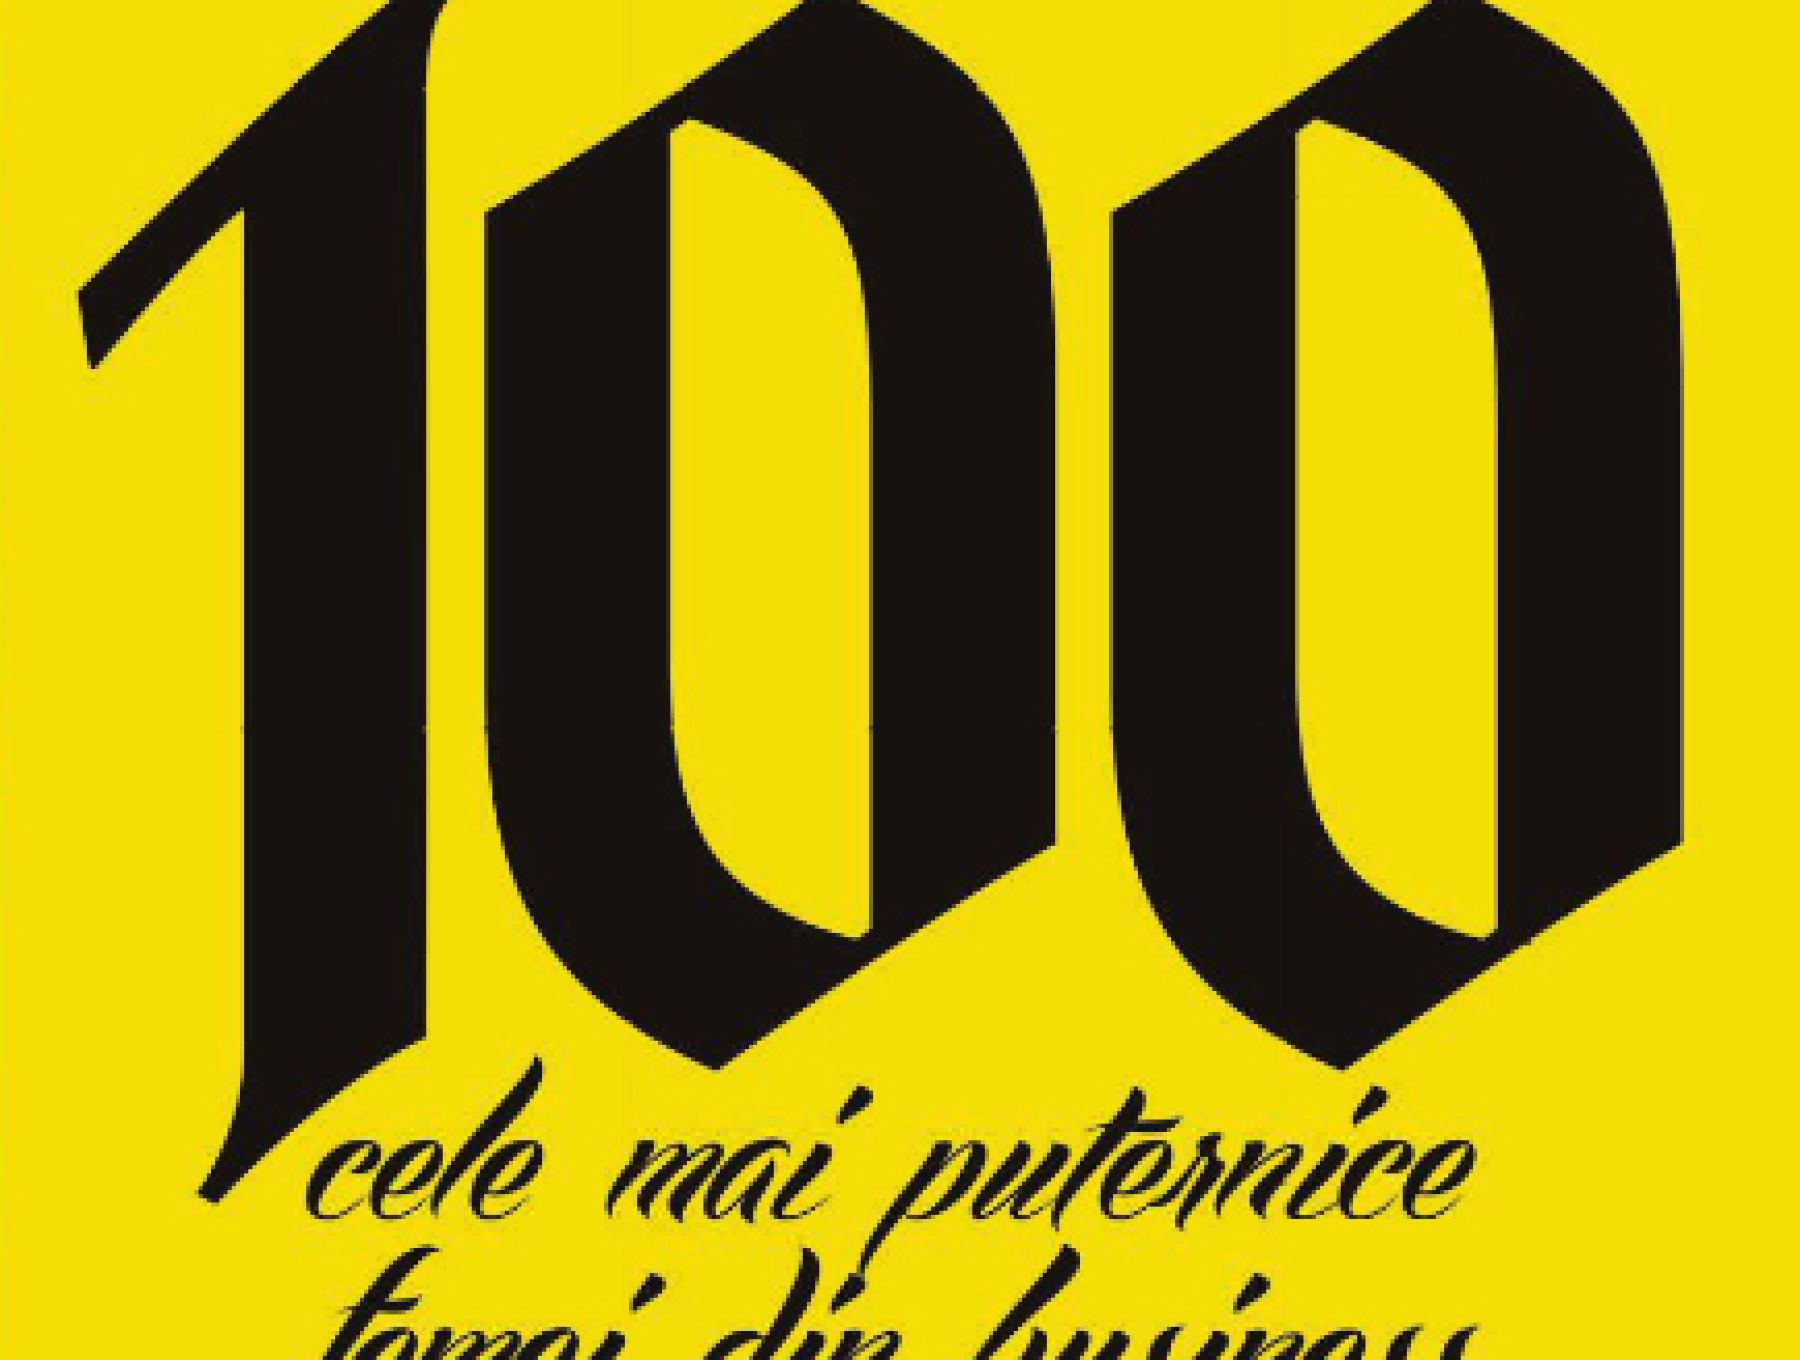 Cristina Căpitanu and Beatrice Dumitrașcu, in Business Magazin 100 most powerful women in business